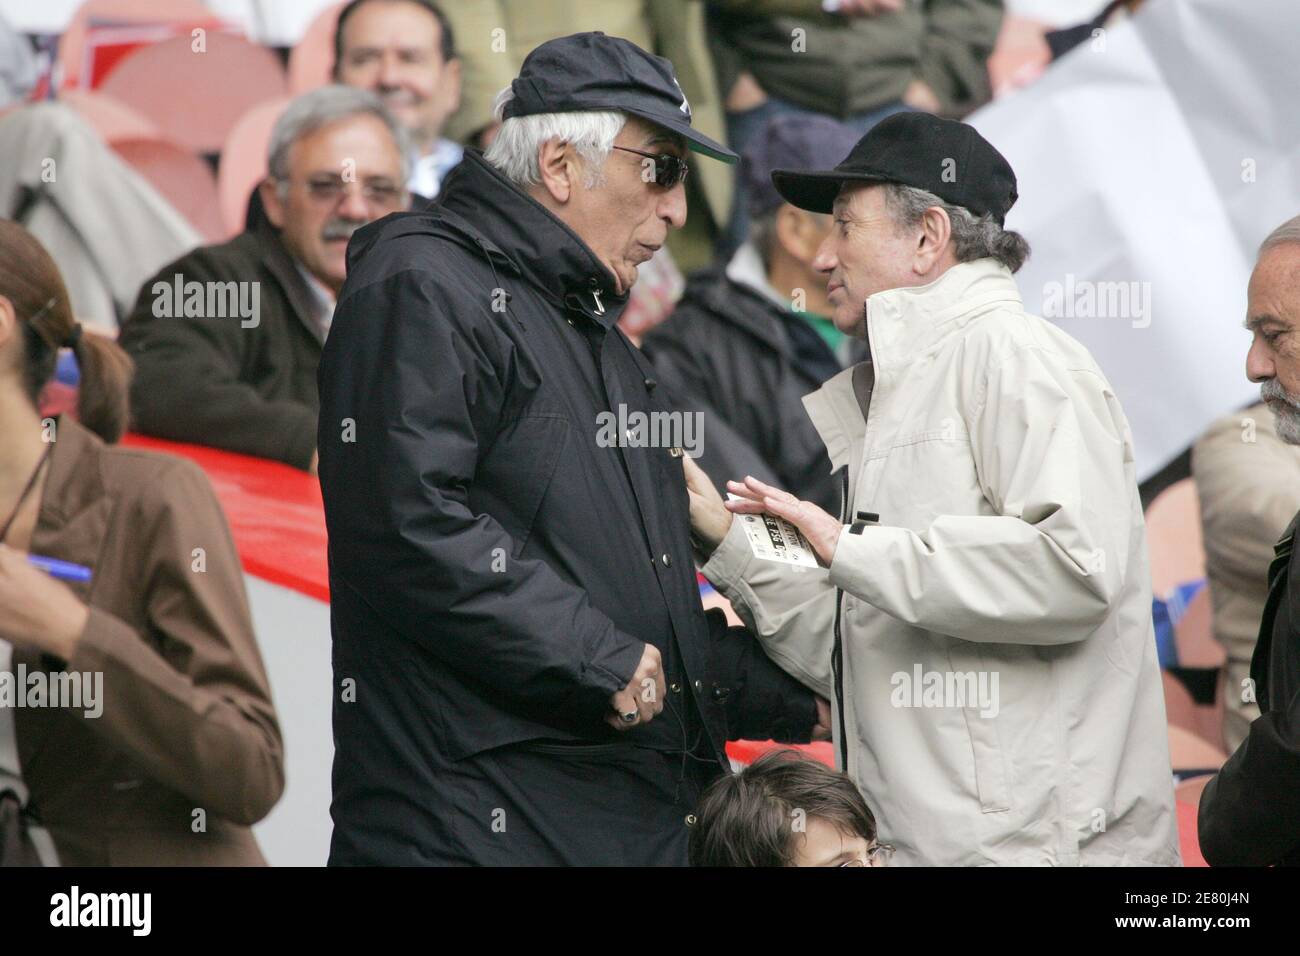 French actor Gerard Darmon and TV presenter Michel Drucker attend the French Championship , PSG vs Olympic Lyonnais at the Parc des Princes stadium in Paris, France, on May 5, 2007. The game ended in a draw 1-1. Photo by Gouhier-Taamallah/Cameleon/ABACAPRESS.COM Stock Photo